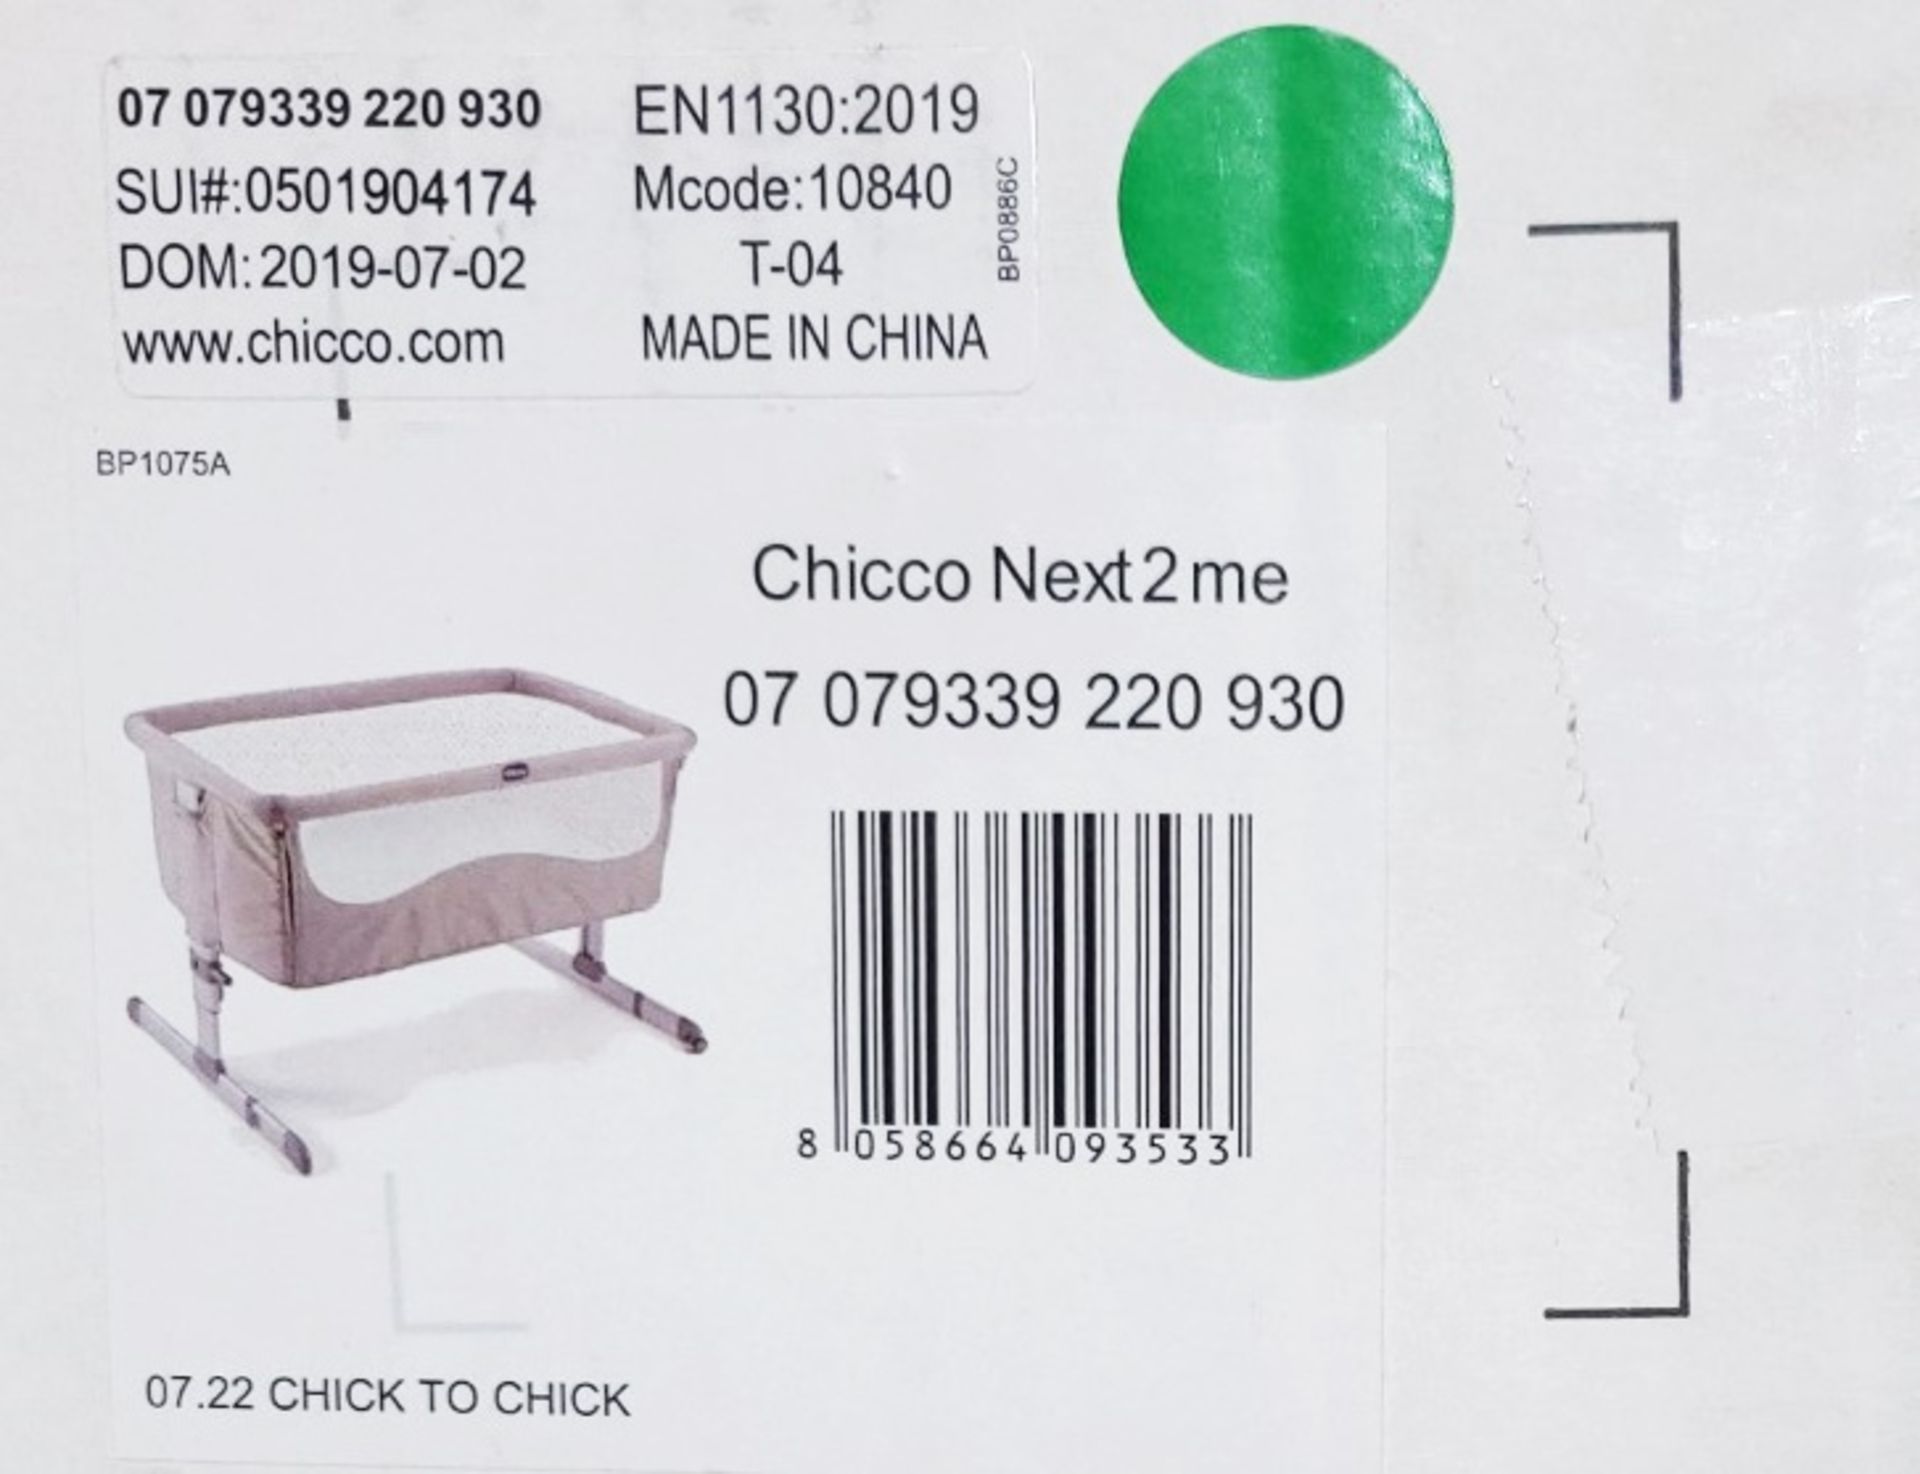 1 x CHICCO Next2me 'Chick to Chick' Bedside Baby Crib With Mattress - New Sealed Stock - RRP £299.00 - Image 6 of 6